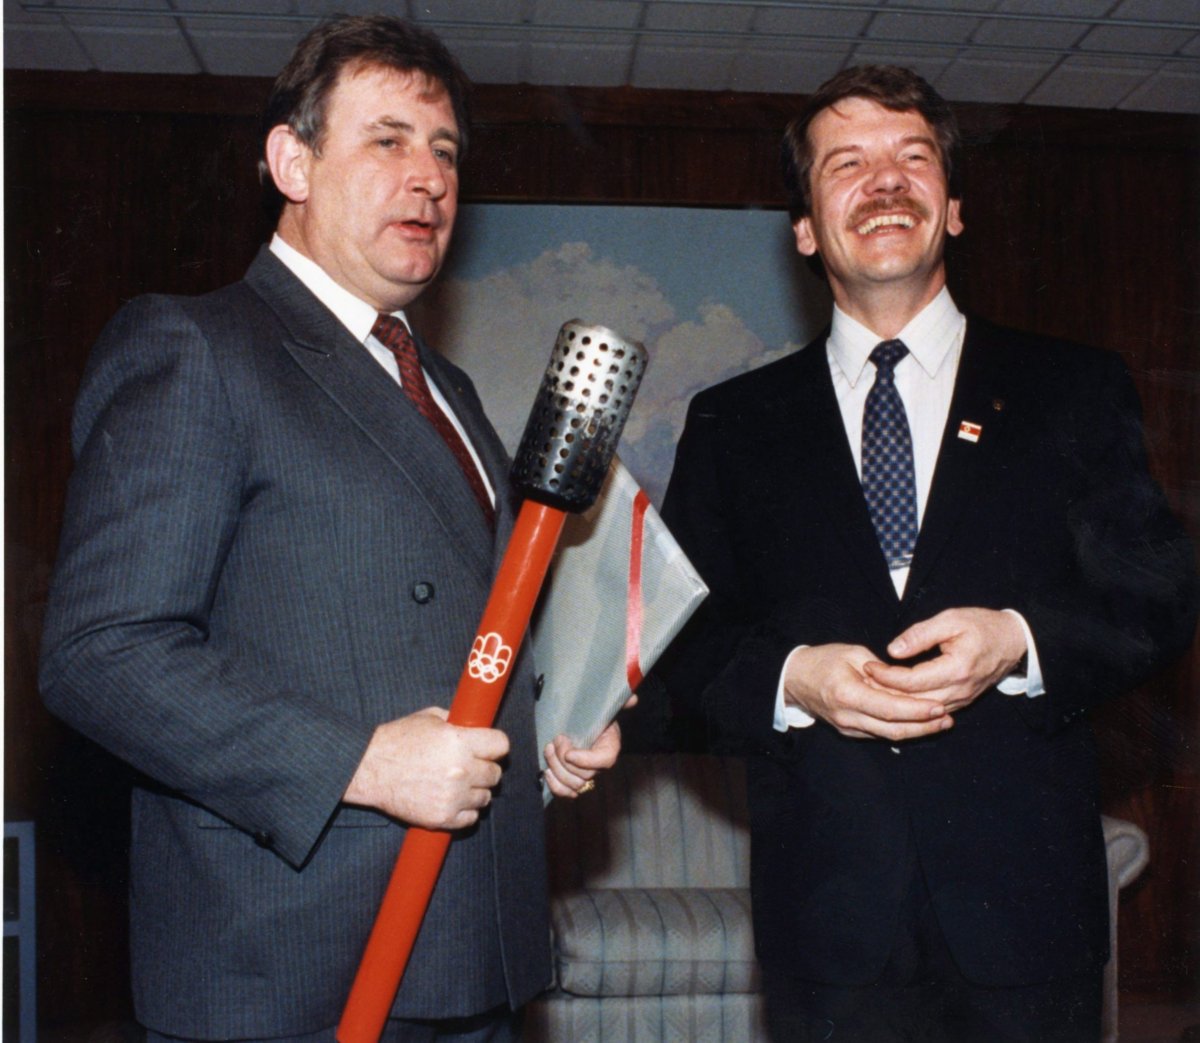 Montreal Mayor Jean Dore (right) hands over the Montreal Olympic torch to the Calgary Mayor Ralph Klein at Calgary City Hallo n Feb. 12, 1988. 
